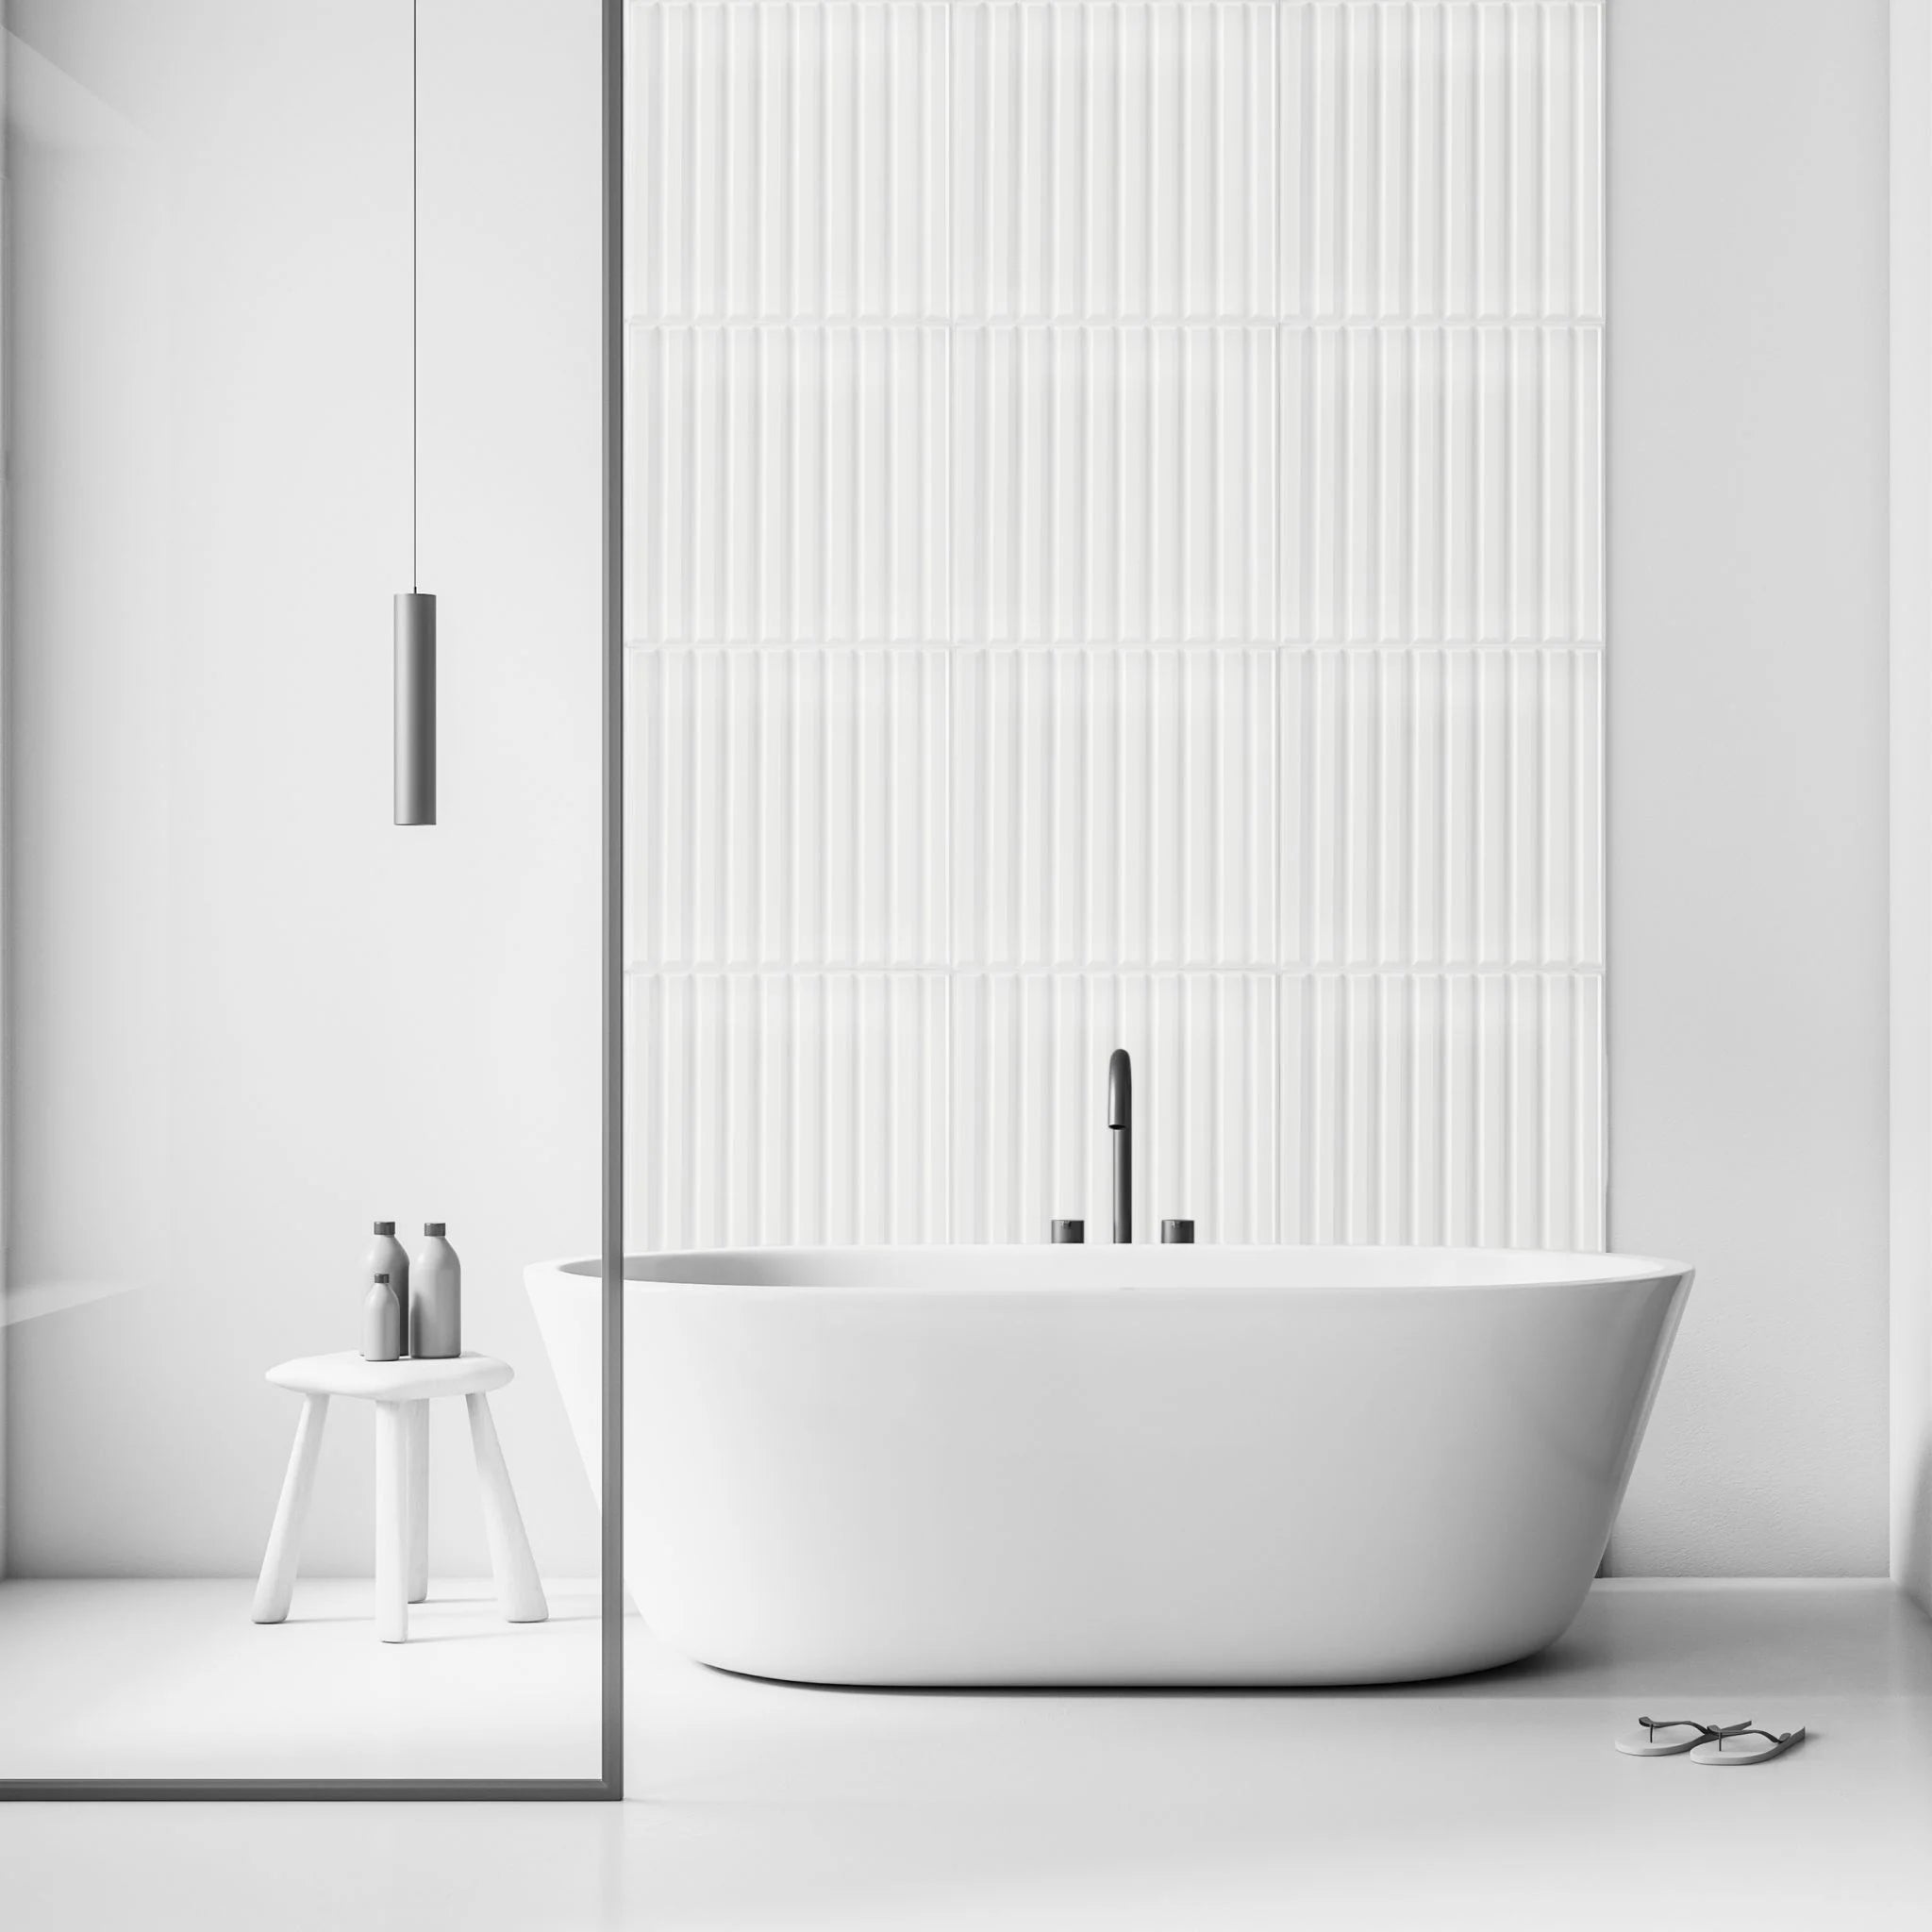 White PVC wall panel with vertical lines in modern bathroom